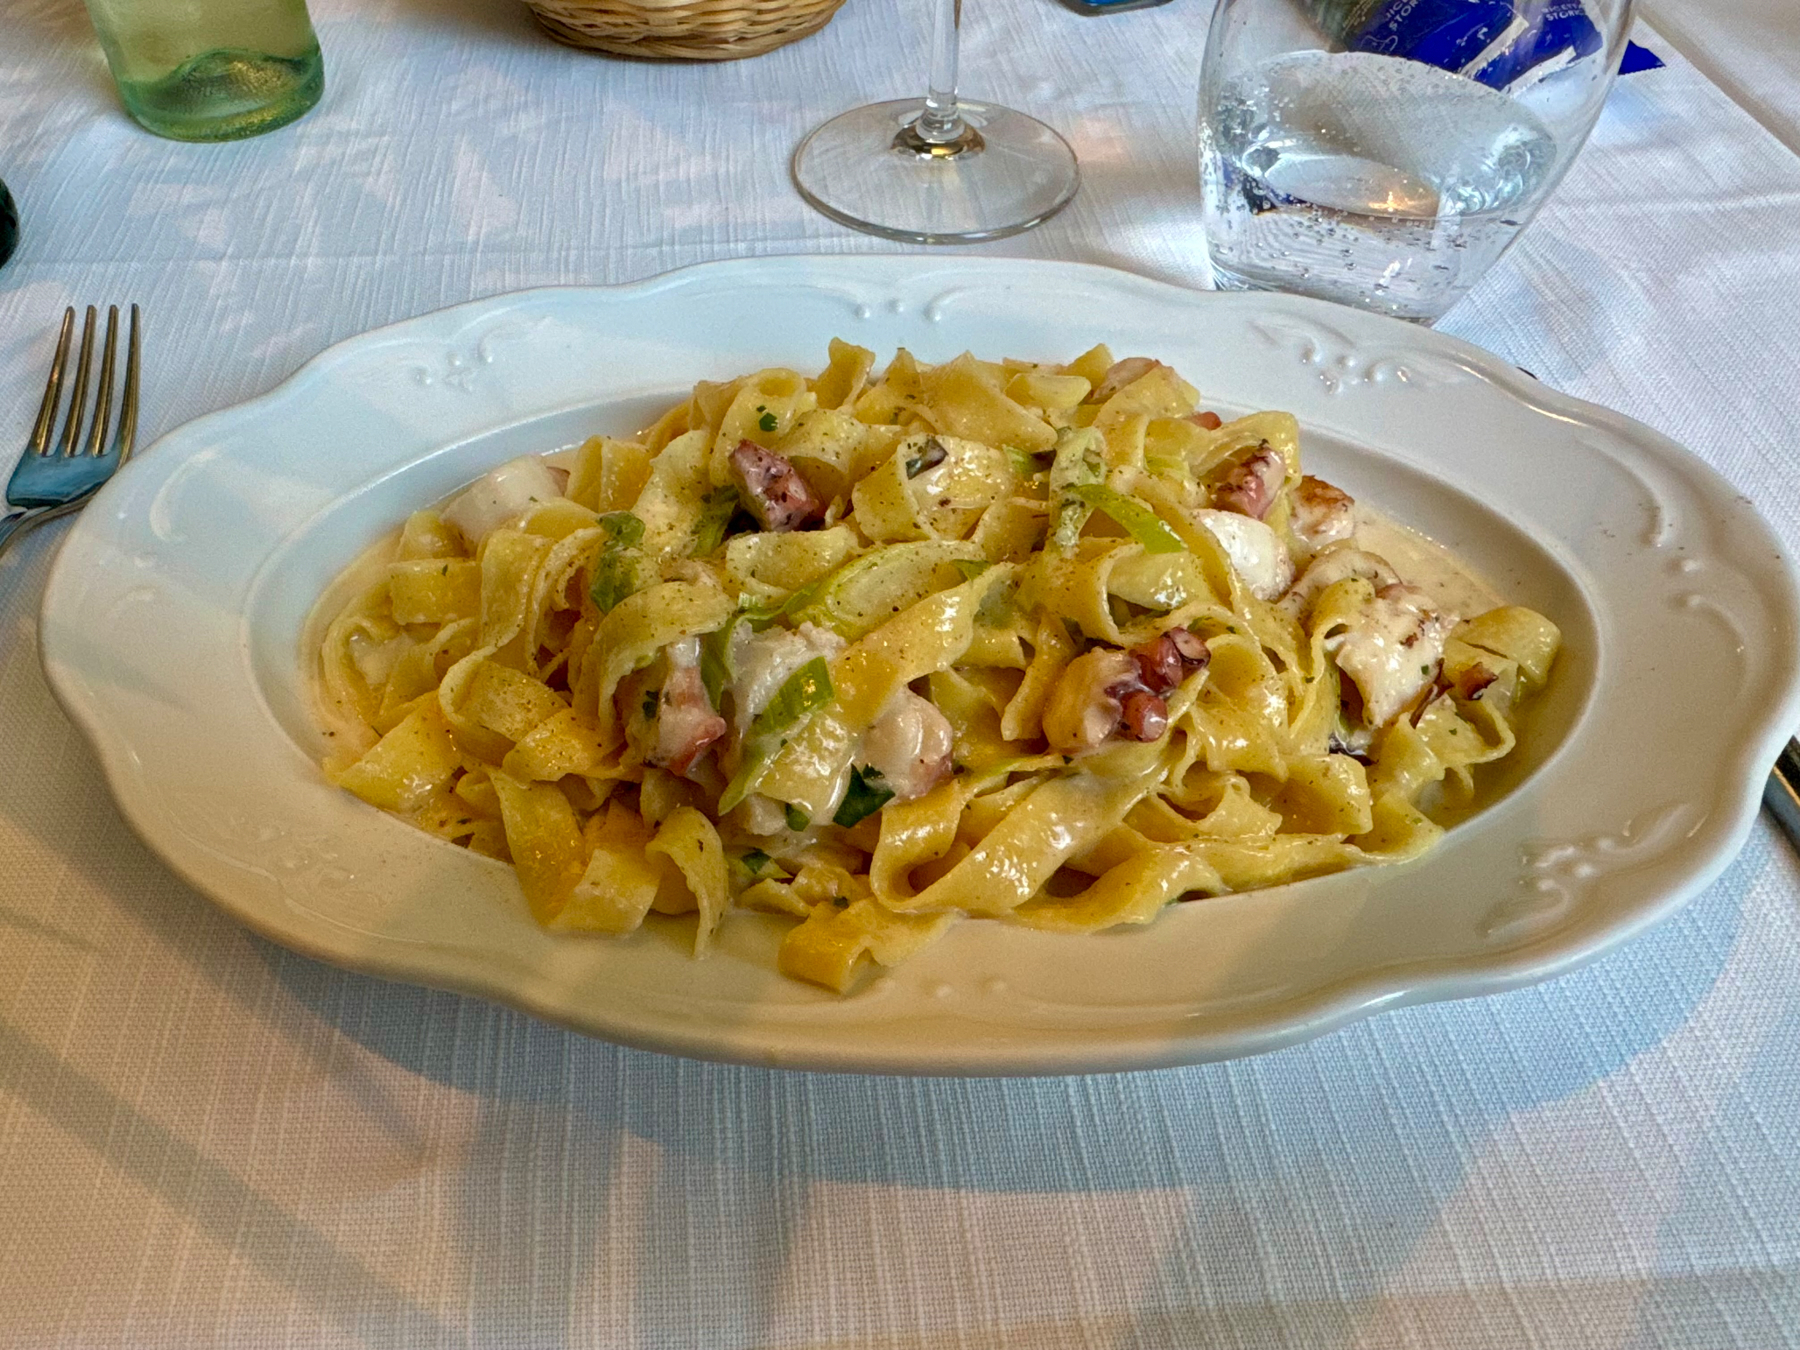 A white plate filled with creamy pasta dish, tagliatelle, garnished with octopus. The plate is on a white tablecloth with a fork, wine glass, and glass of water visible around it.